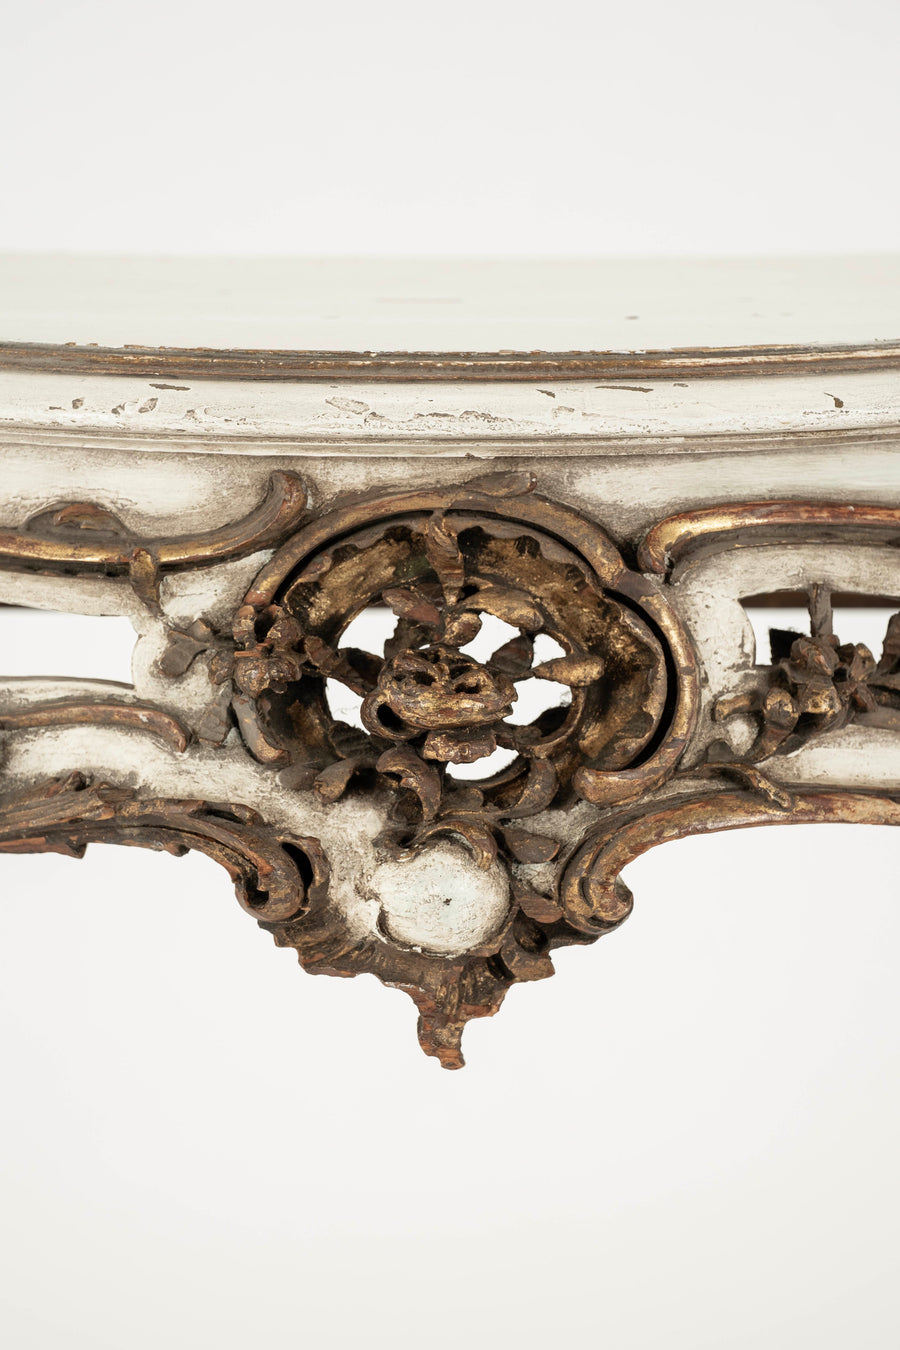 Louis XV Style Giltwood Console